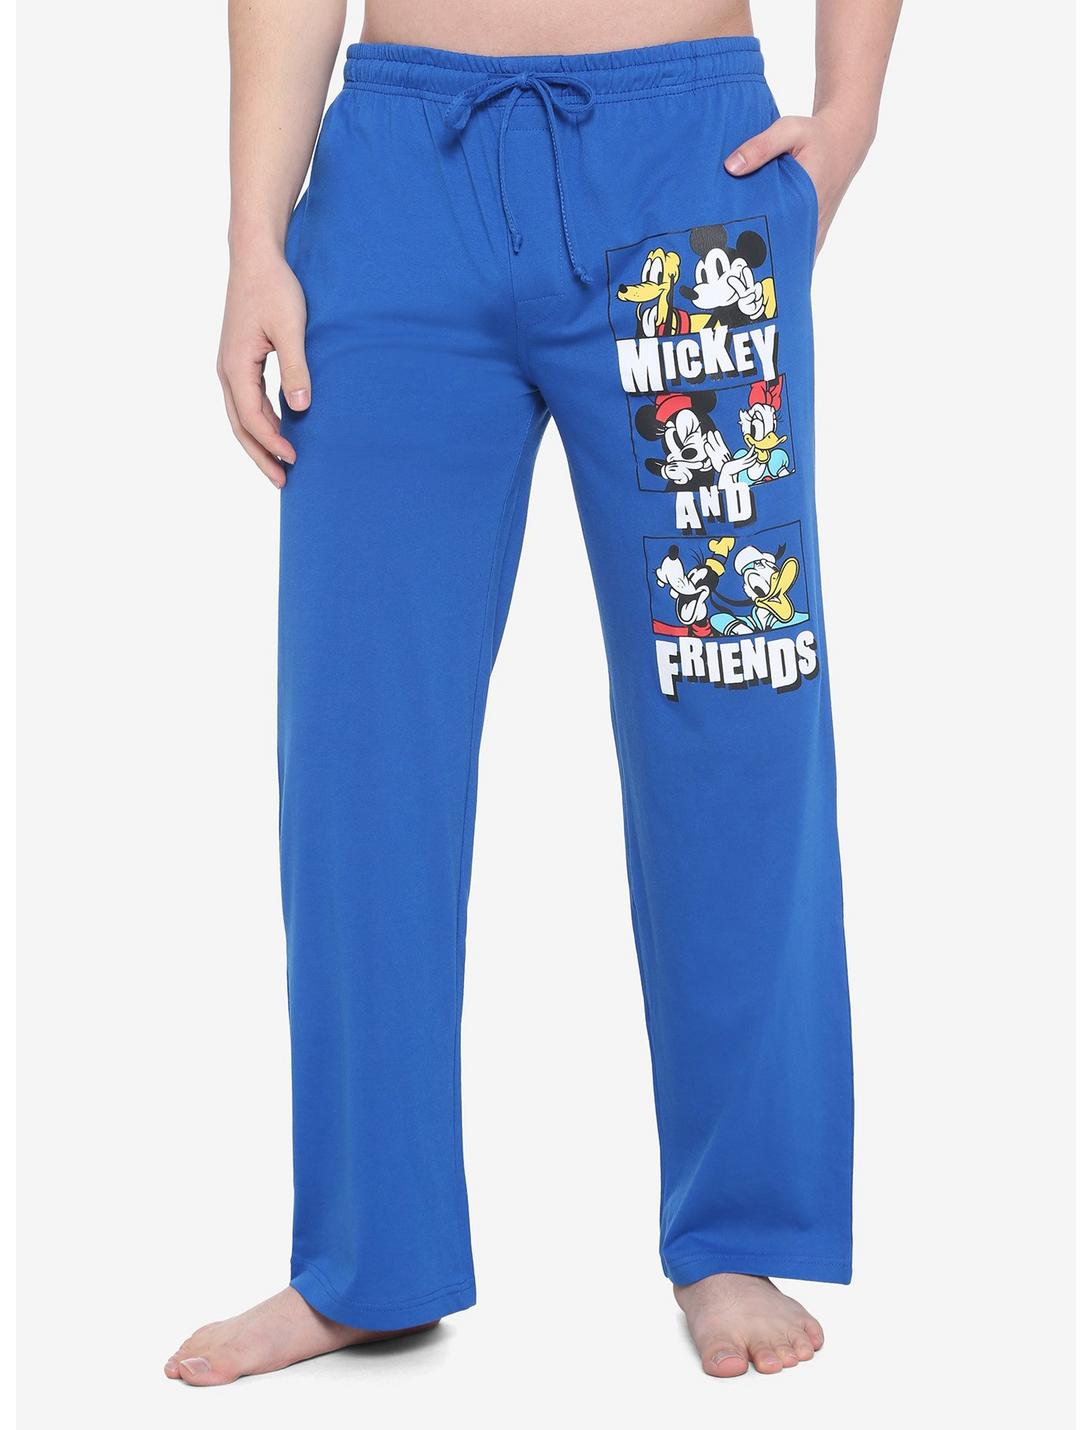 Disney Mickey Mouse And Friends Pajama Pants, BLUE, hi-res